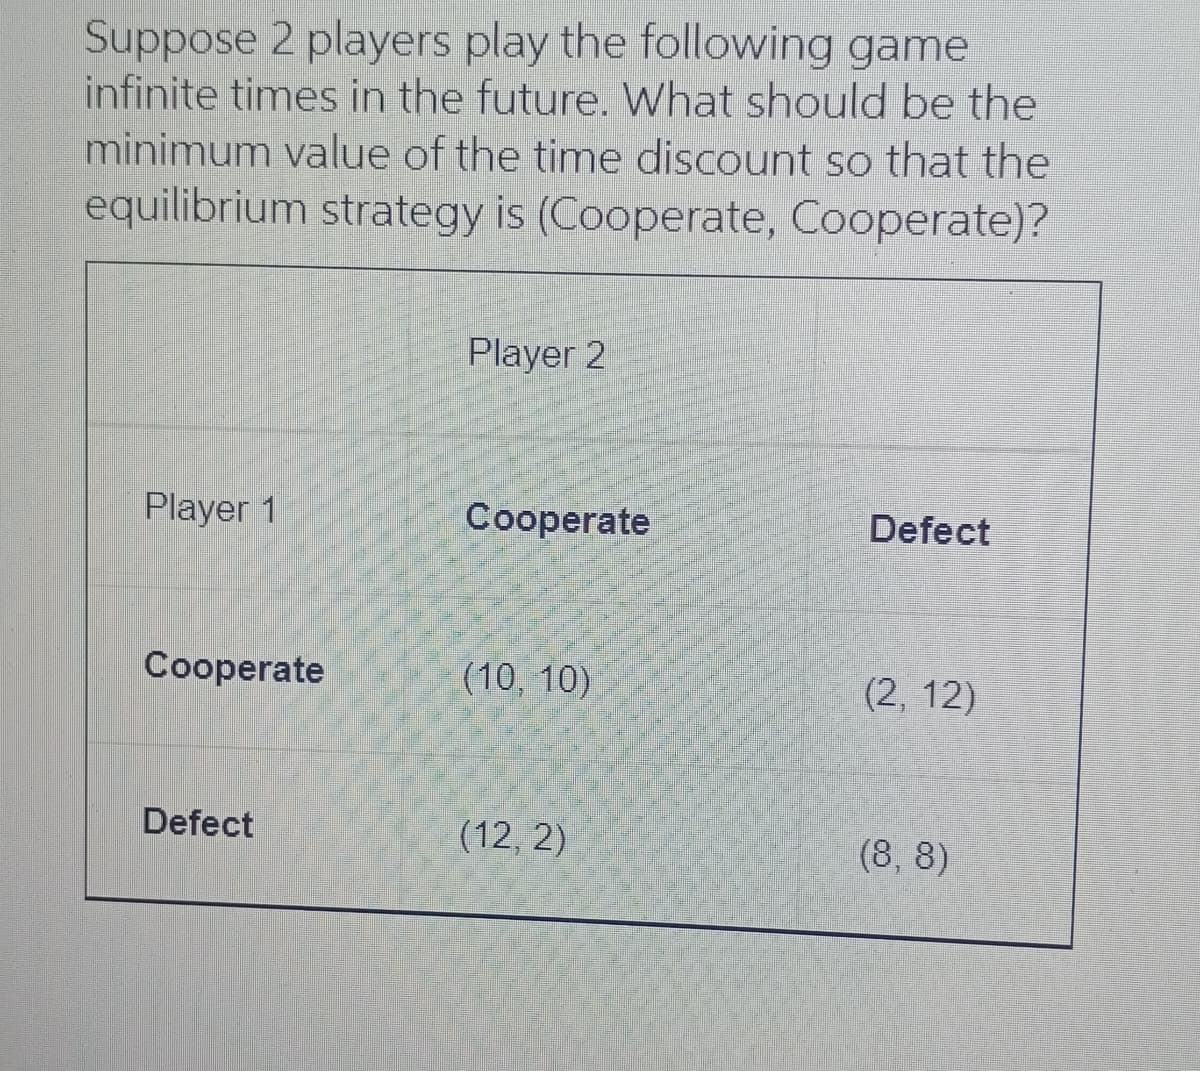 Suppose 2 players play the following game
infinite times in the future. What should be the
minimum value of the time discount so that the
equilibrium strategy is (Cooperate, Cooperate)?
Player 2
Player 1
Cooperate
Defect
Cooperate
(10, 10)
(2, 12)
Defect
(12, 2)
(8, 8)
